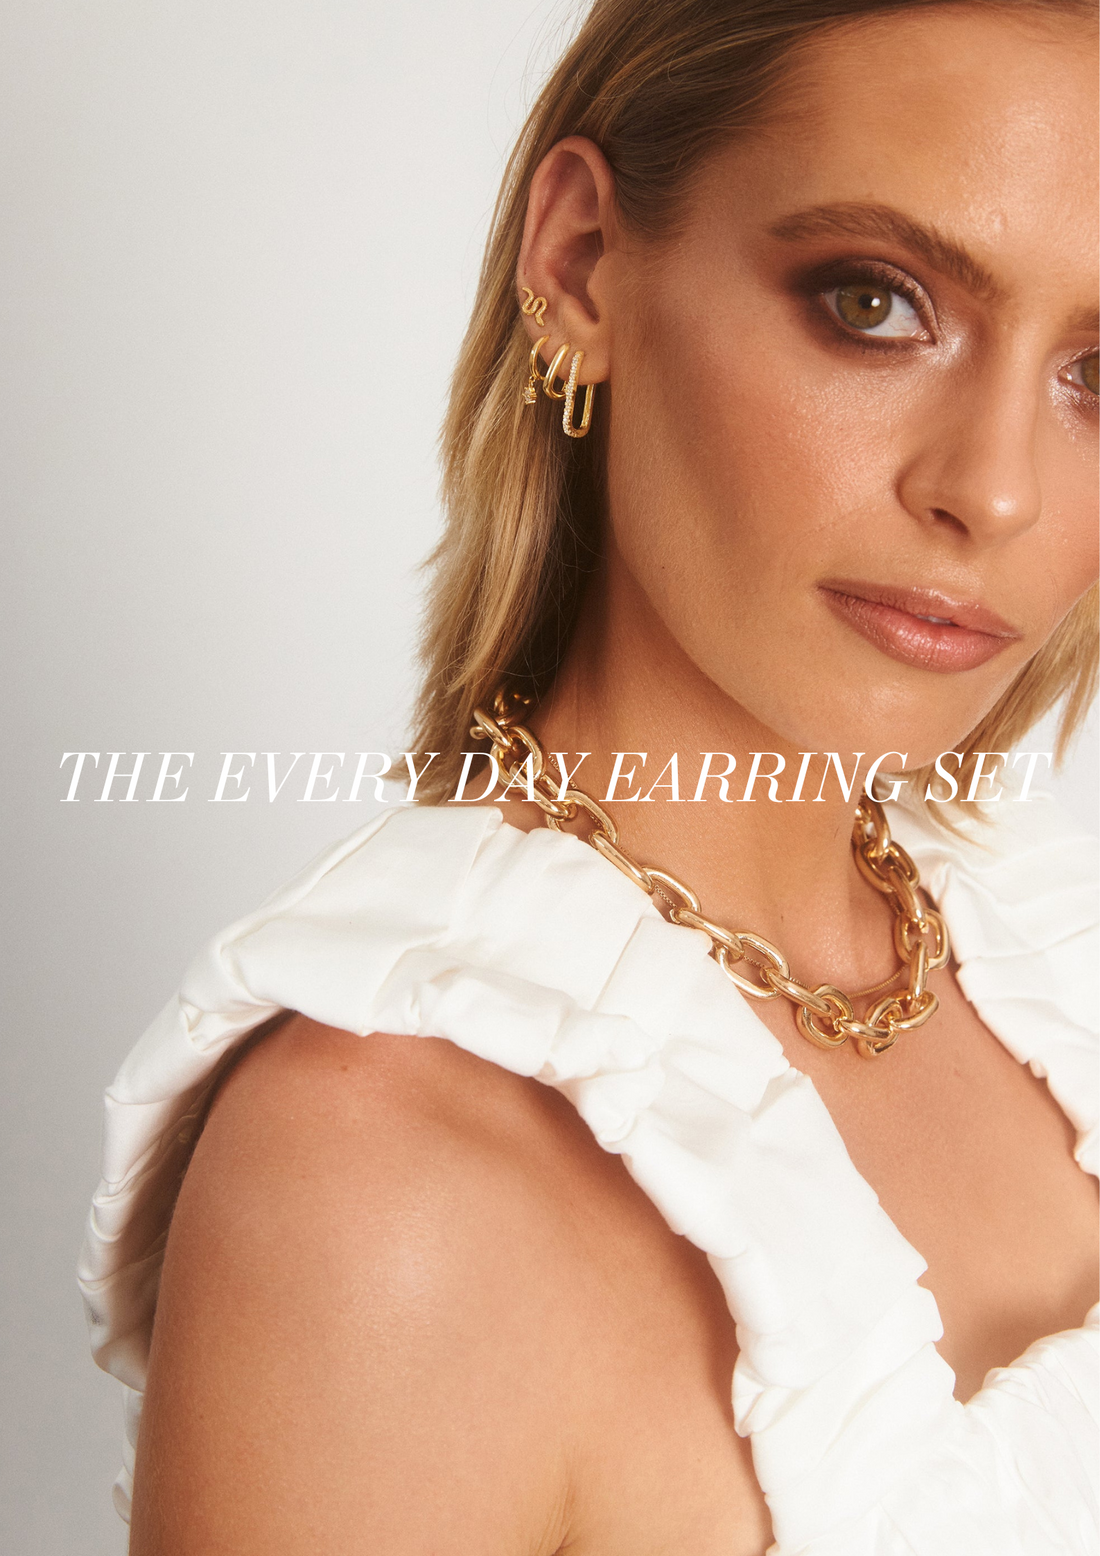 The Everyday Earring Set